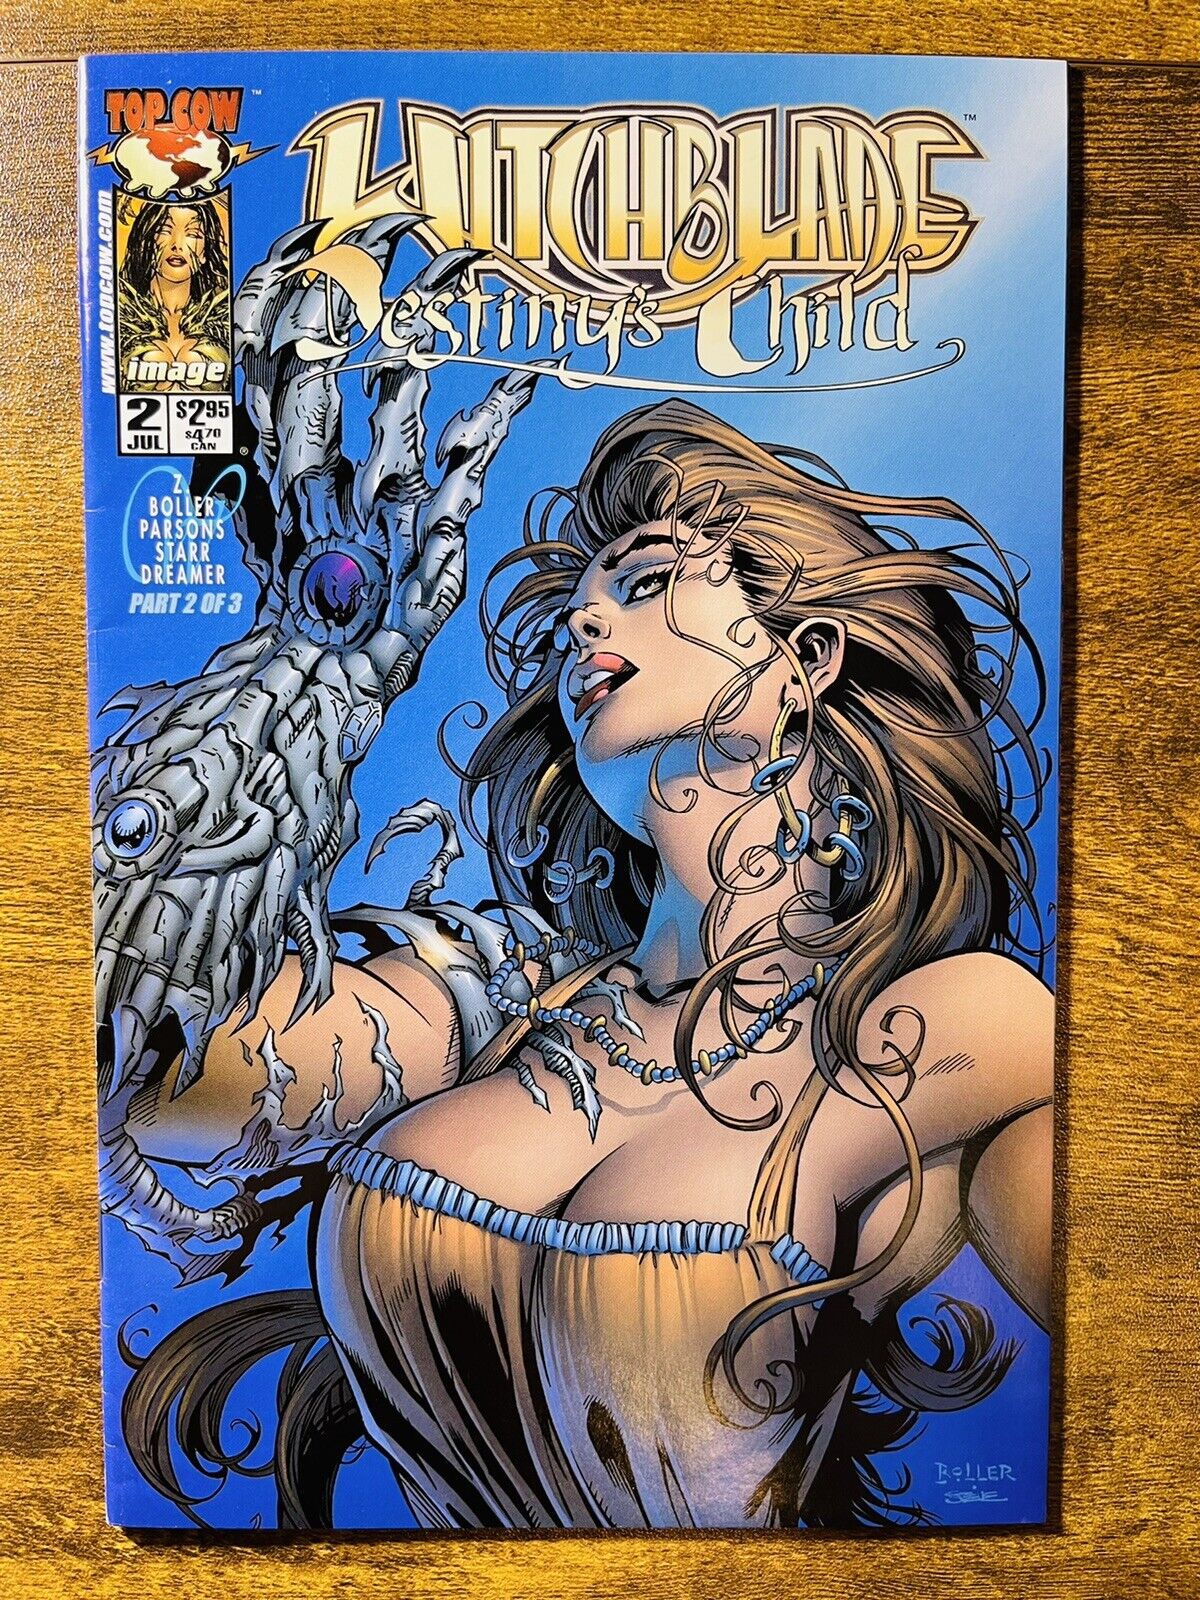 WITCHBLADE DESTINY’S CHILD 2 GORGEOUS FIRCHOW COVER IMAGE TOP COW COMICS 2000